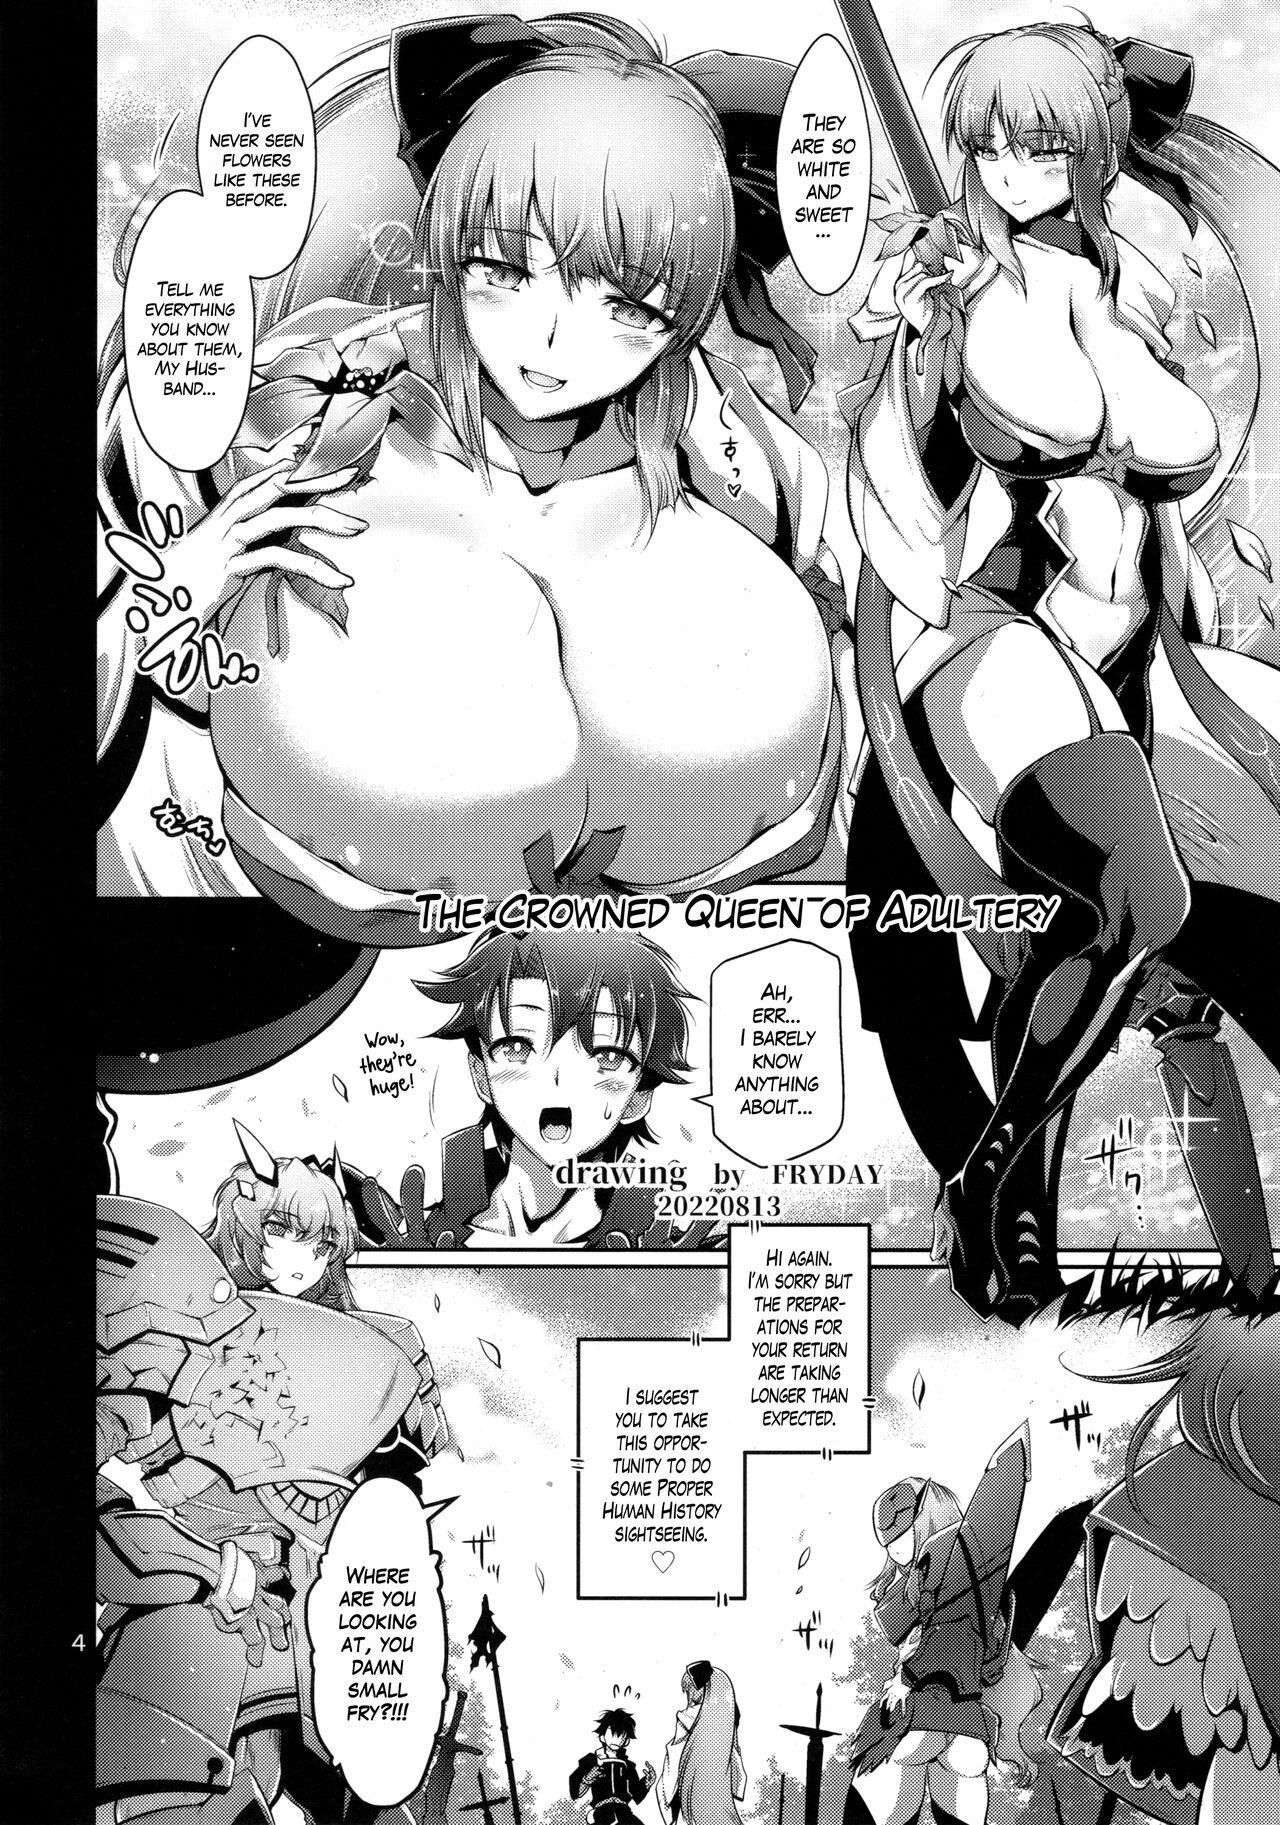 Leaked Taikan Joou | The Crowned Queen of Adultery - Fate grand order Oiled - Page 3